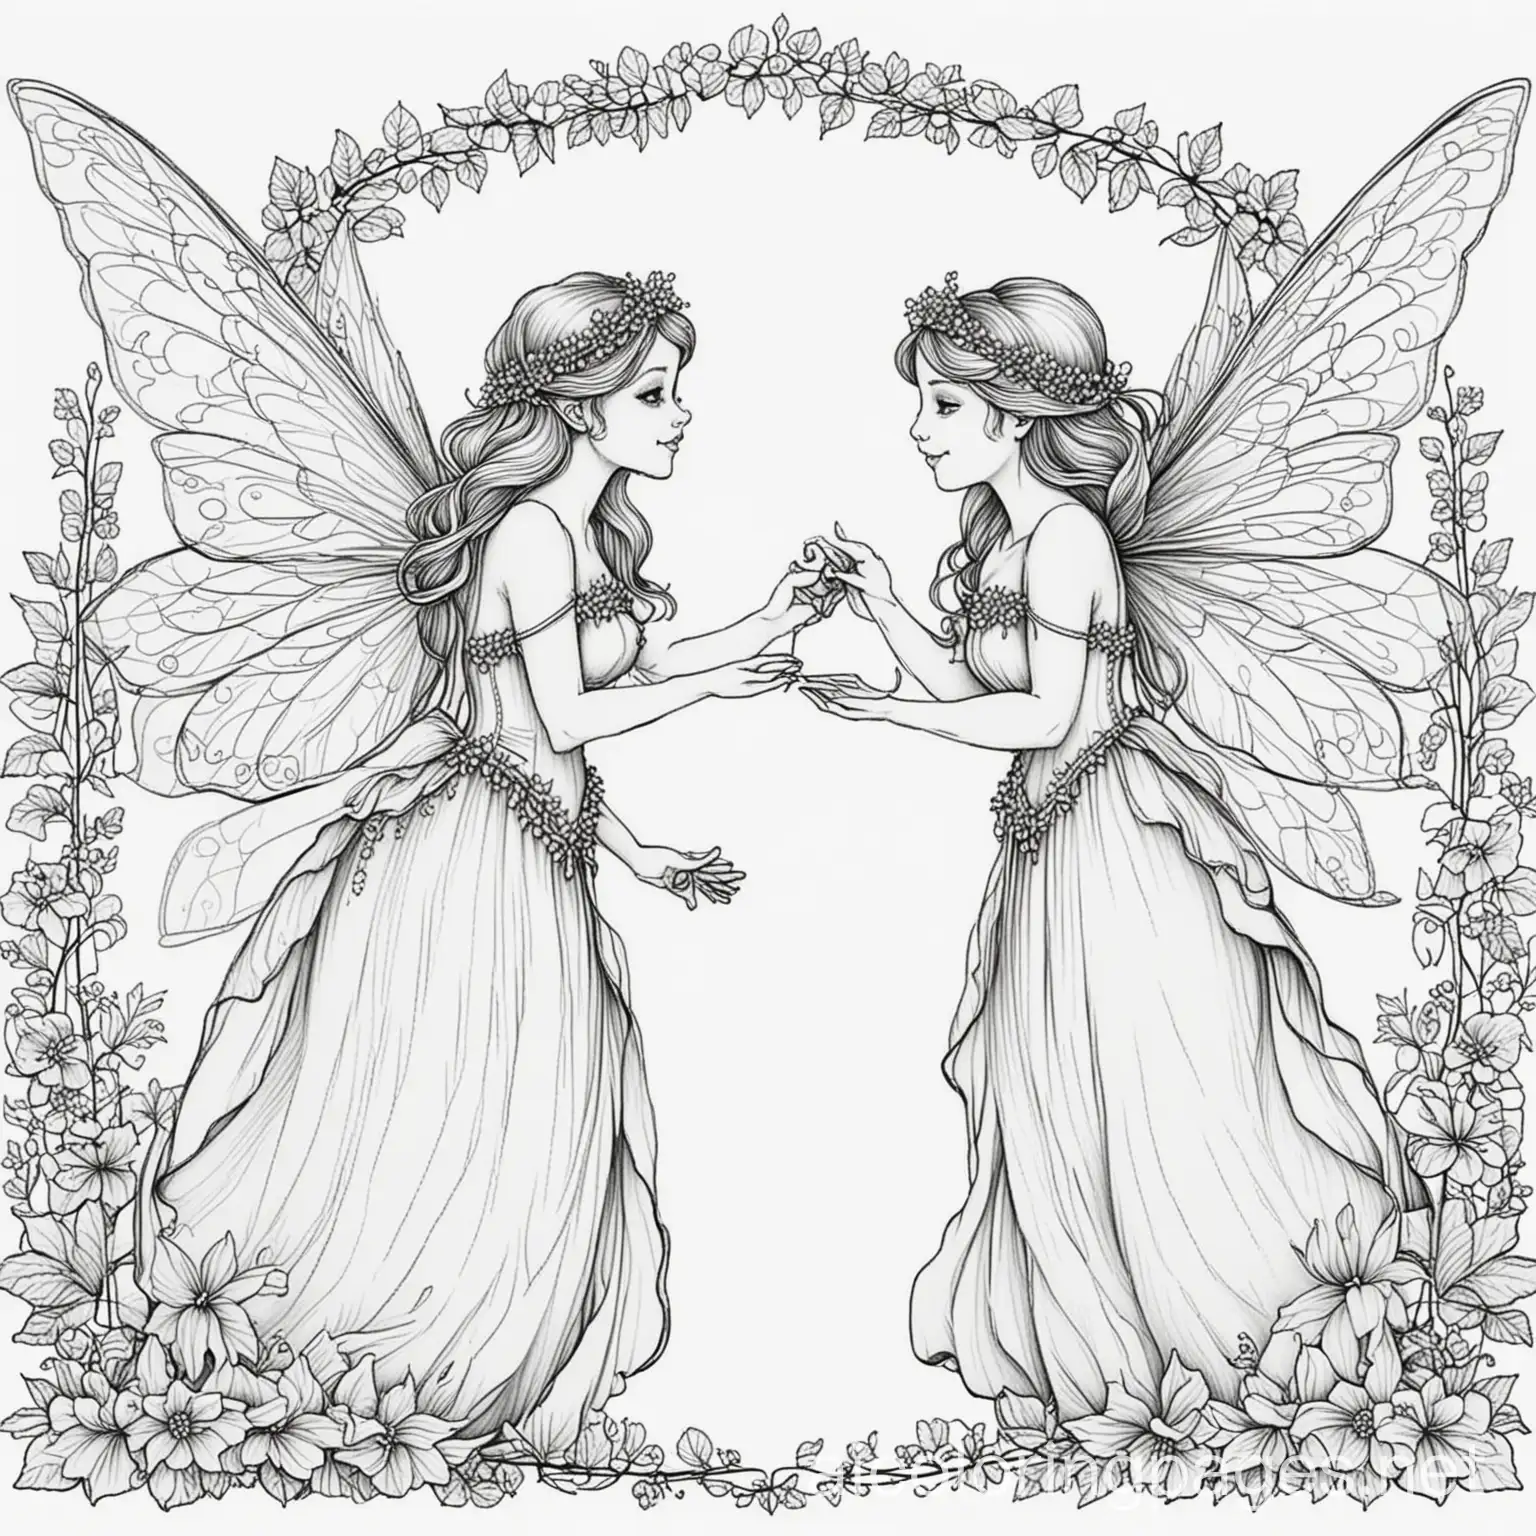 Fairies marrying each other, Coloring Page, black and white, line art, white background, Simplicity, Ample White Space. The background of the coloring page is plain white to make it easy for young children to color within the lines. The outlines of all the subjects are easy to distinguish, making it simple for kids to color without too much difficulty